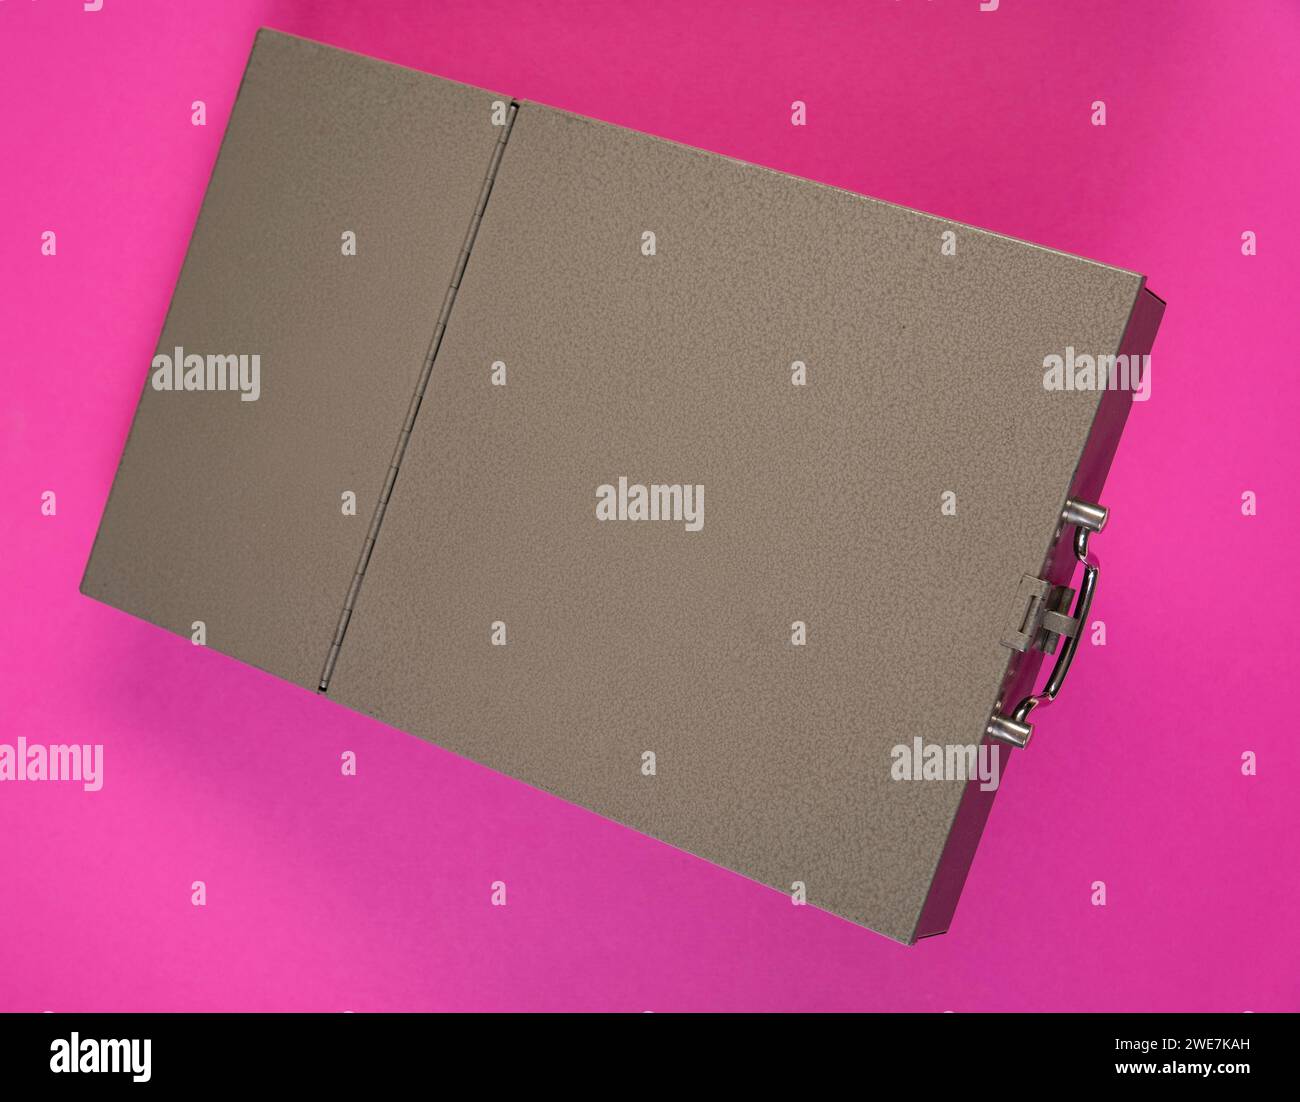 Cash box of a bank safe deposit box in front of a monochrome pink background Stock Photo